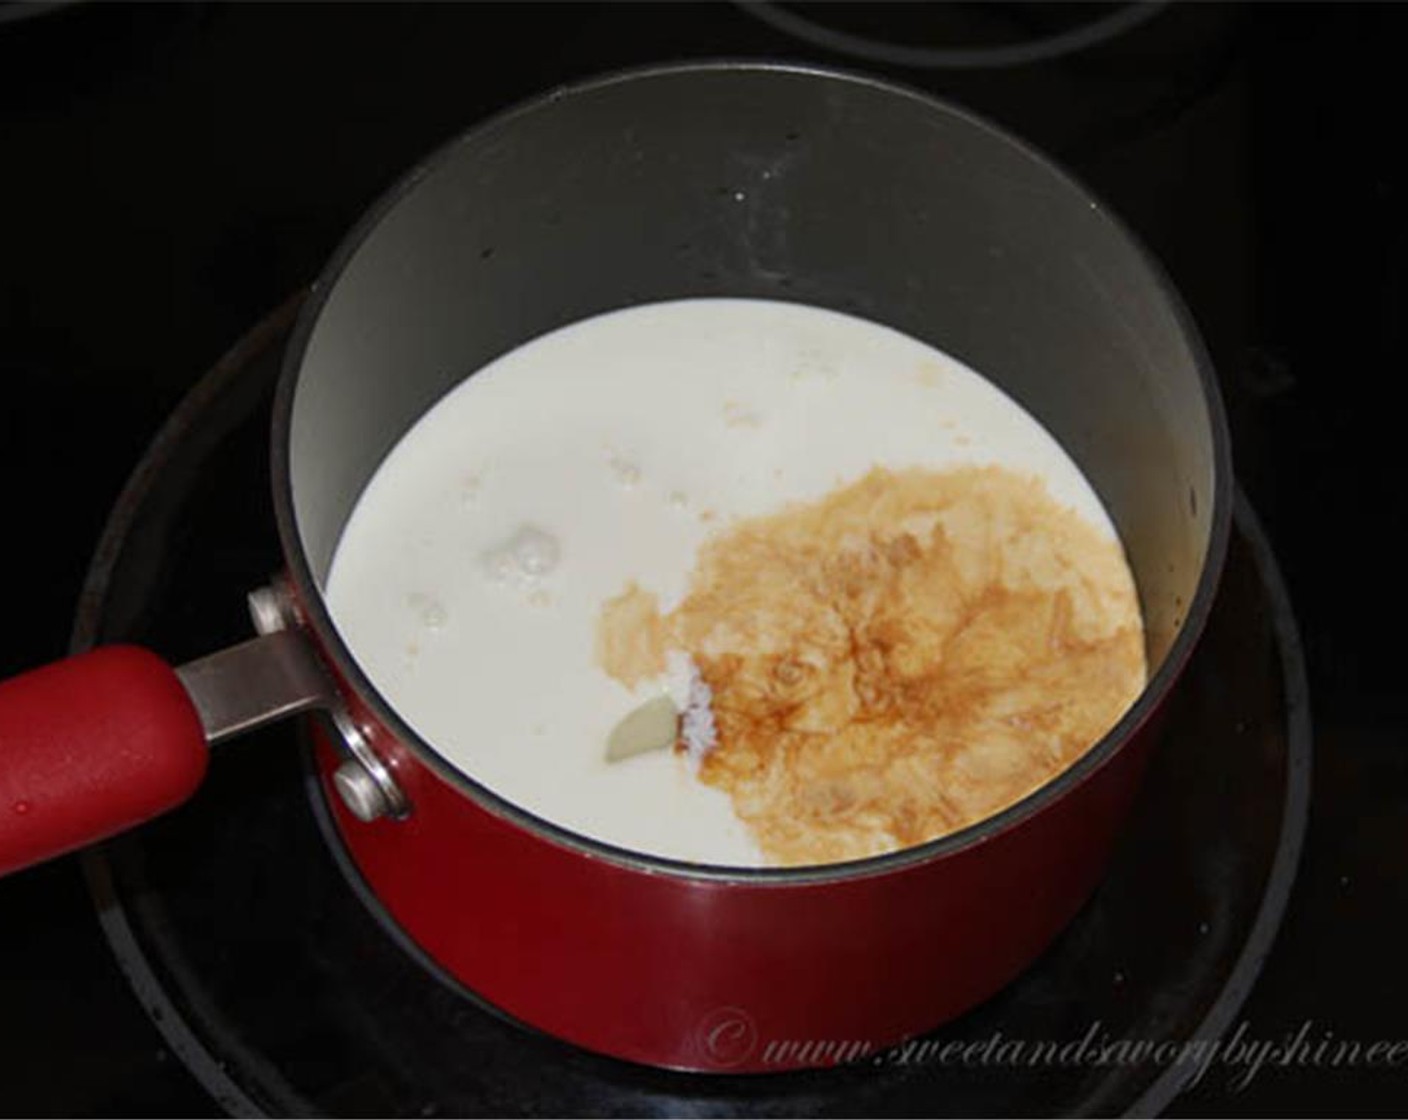 step 1 In a medium saucepan, combine Heavy Cream (1/2 cup), Sweetened Condensed Milk (1/4 cup), Vanilla Extract (1 tsp) and Salt (1 pinch) and bring it to a simmer over medium heat.